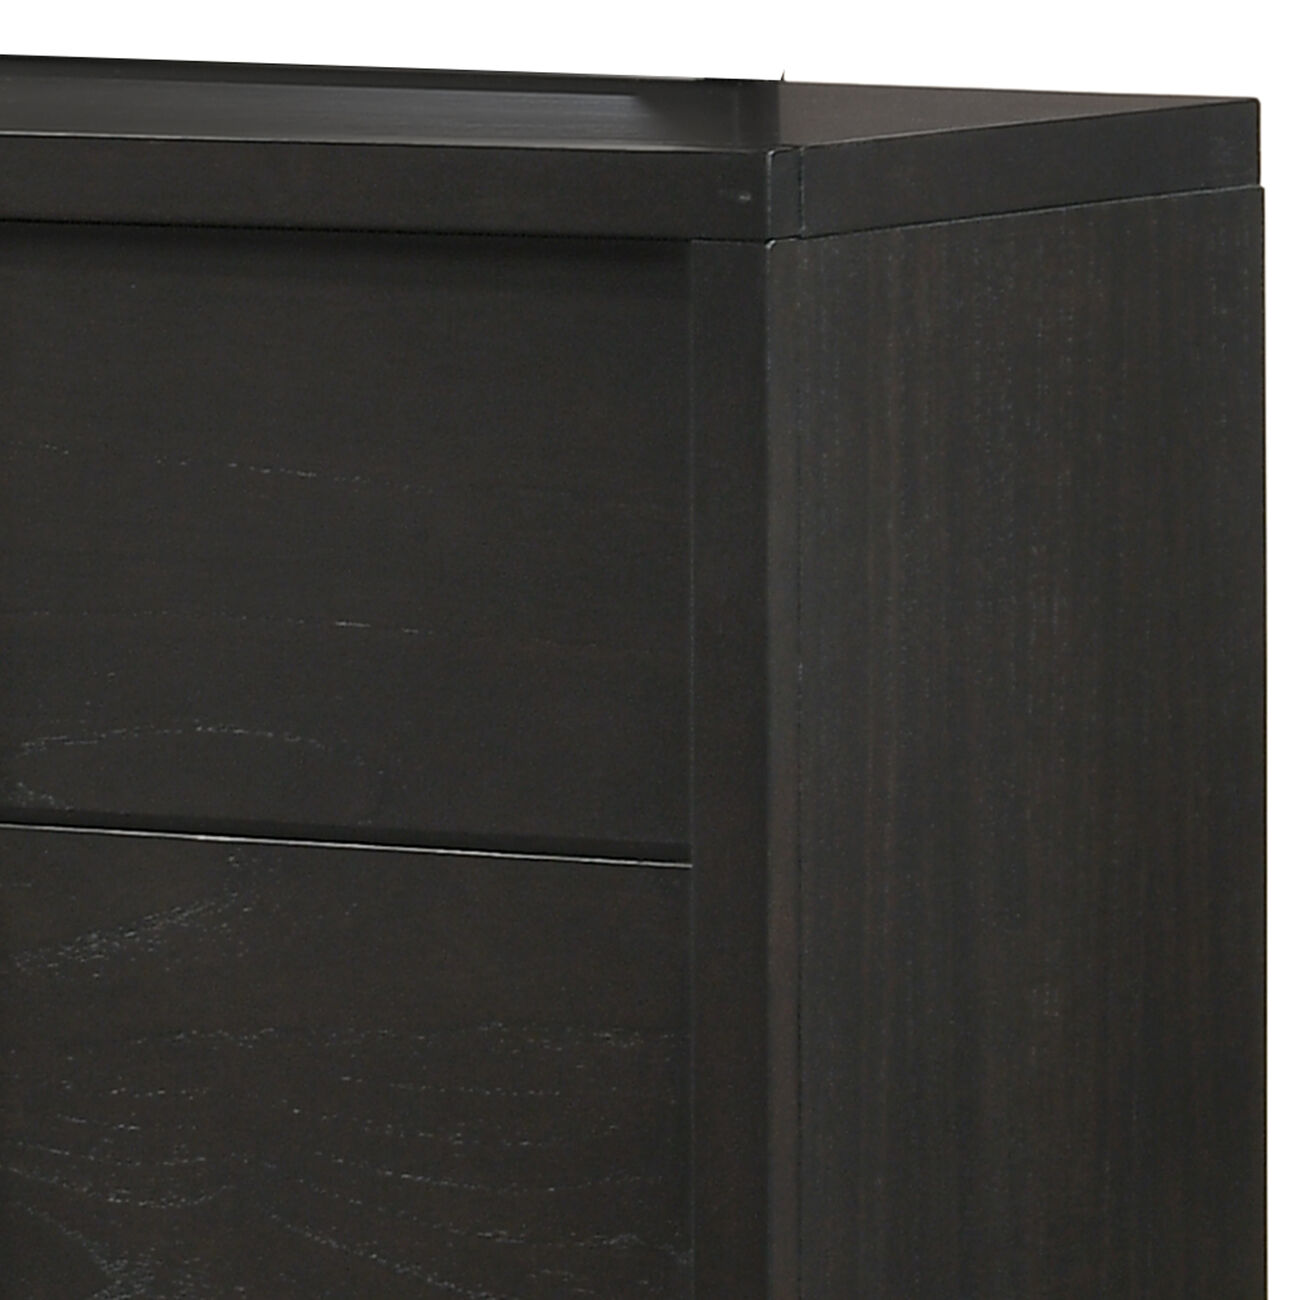 Wooden Dresser with Eight Spacious Drawers and Grain Texture, Brown